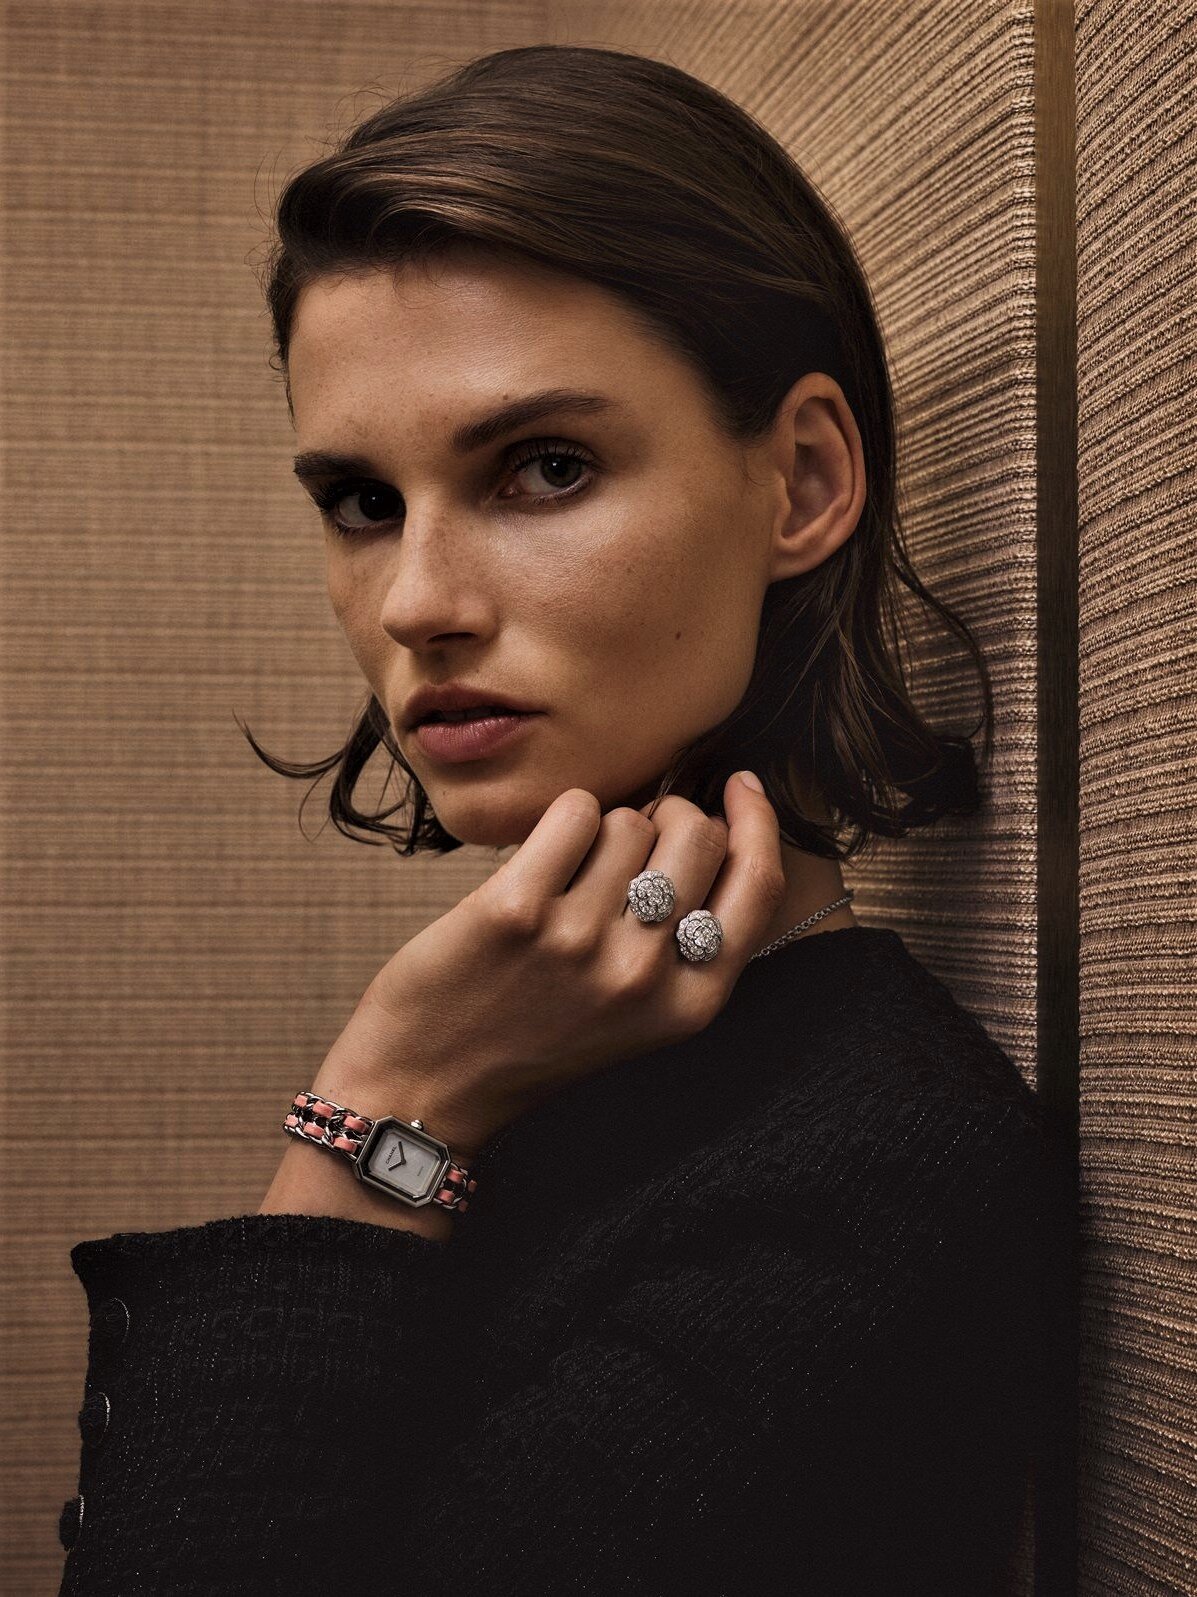 Chanel Fine Jewelry 'Over the Moon' Spring 2020 Campaign — Anne of ...